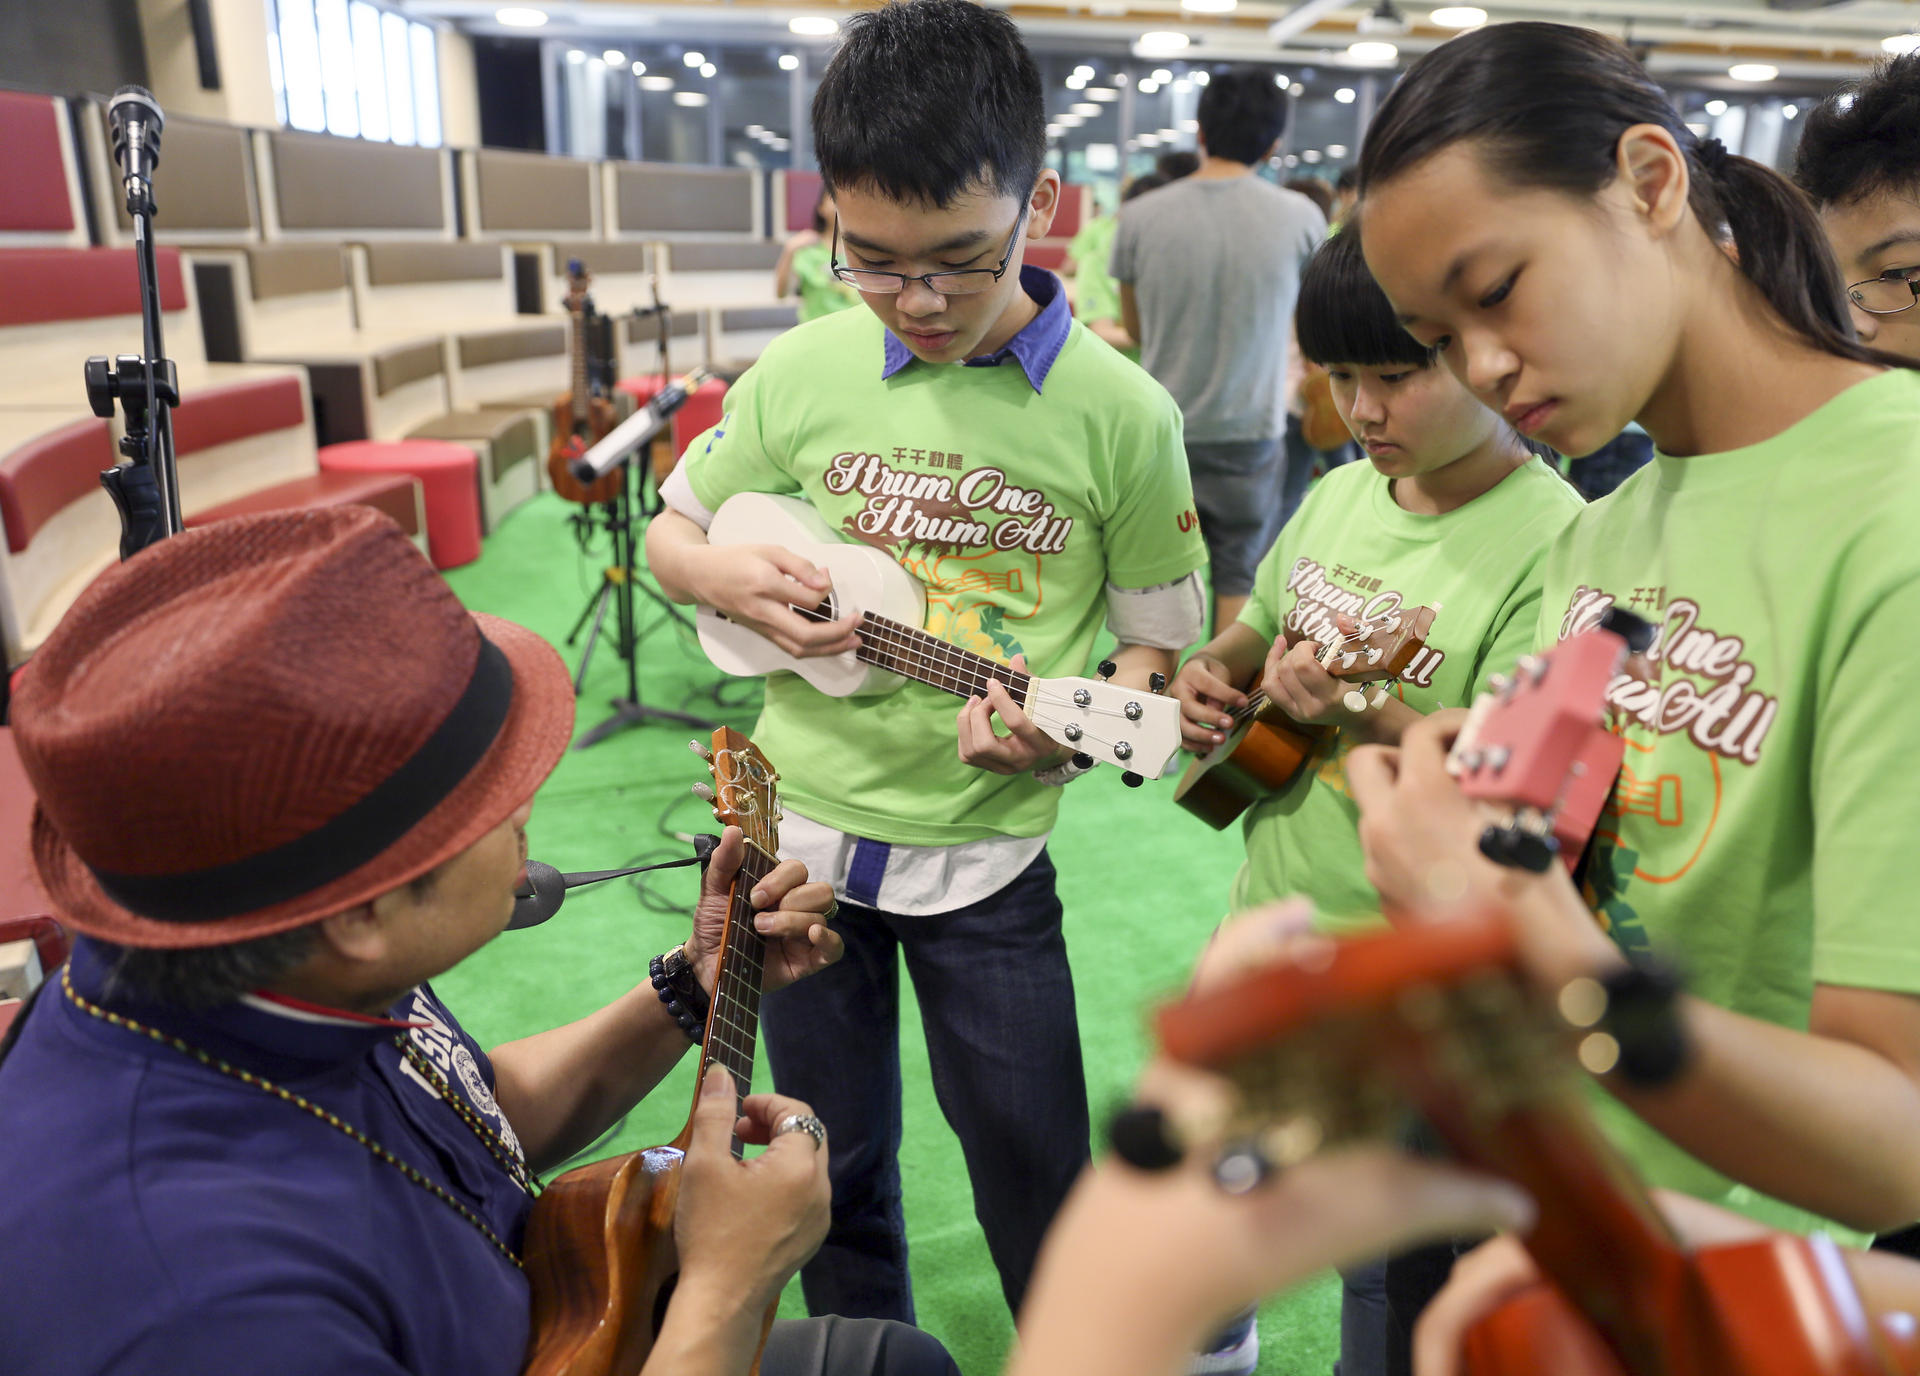 The Strum One, Strum All ukulele jam session allows novices to play alongside professional musicians.